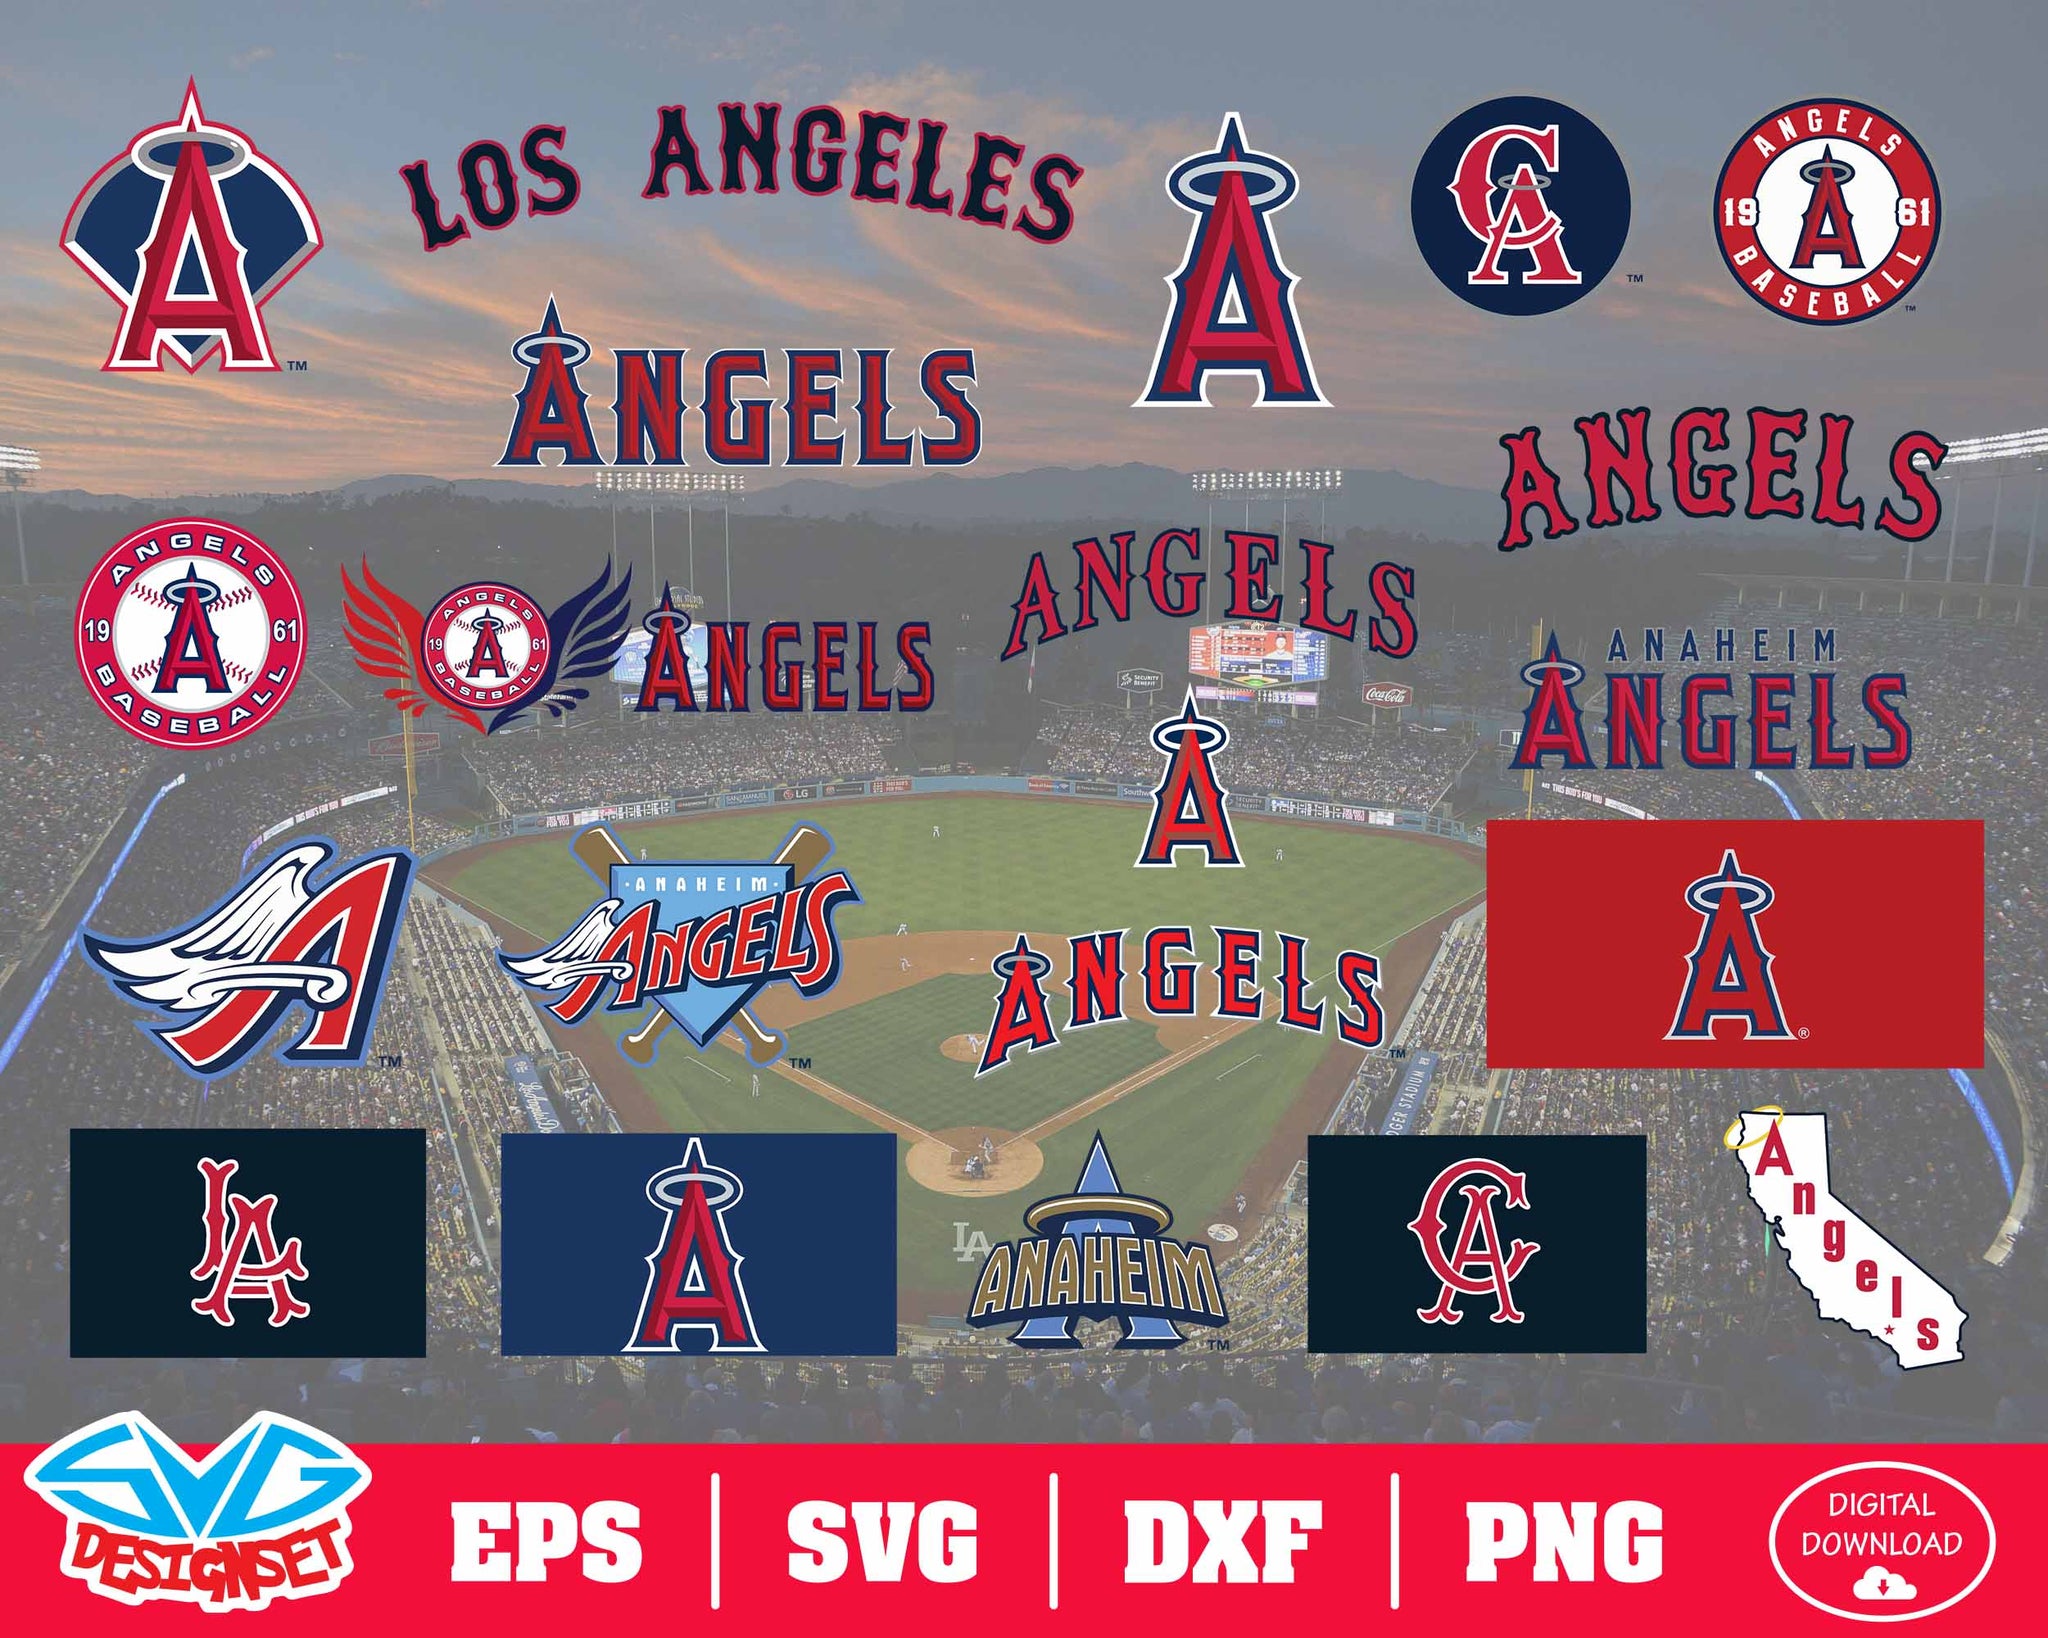 Los Angeles Angels Team Svg, Dxf, Eps, Png, Clipart, Silhouette and Cutfiles - SVGDesignSets